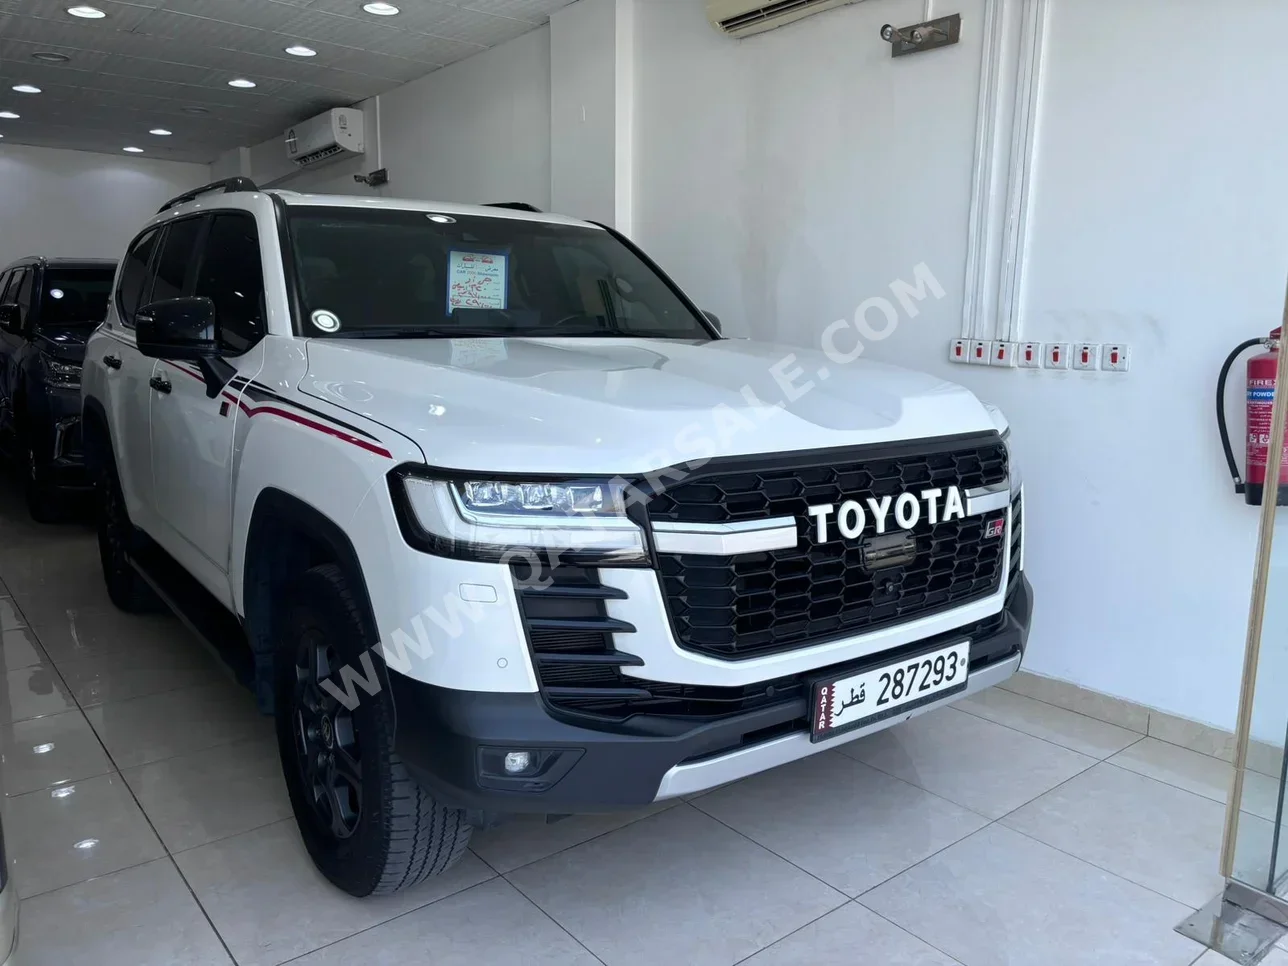 Toyota  Land Cruiser  GR Sport Twin Turbo  2022  Automatic  97,000 Km  6 Cylinder  Four Wheel Drive (4WD)  SUV  White  With Warranty